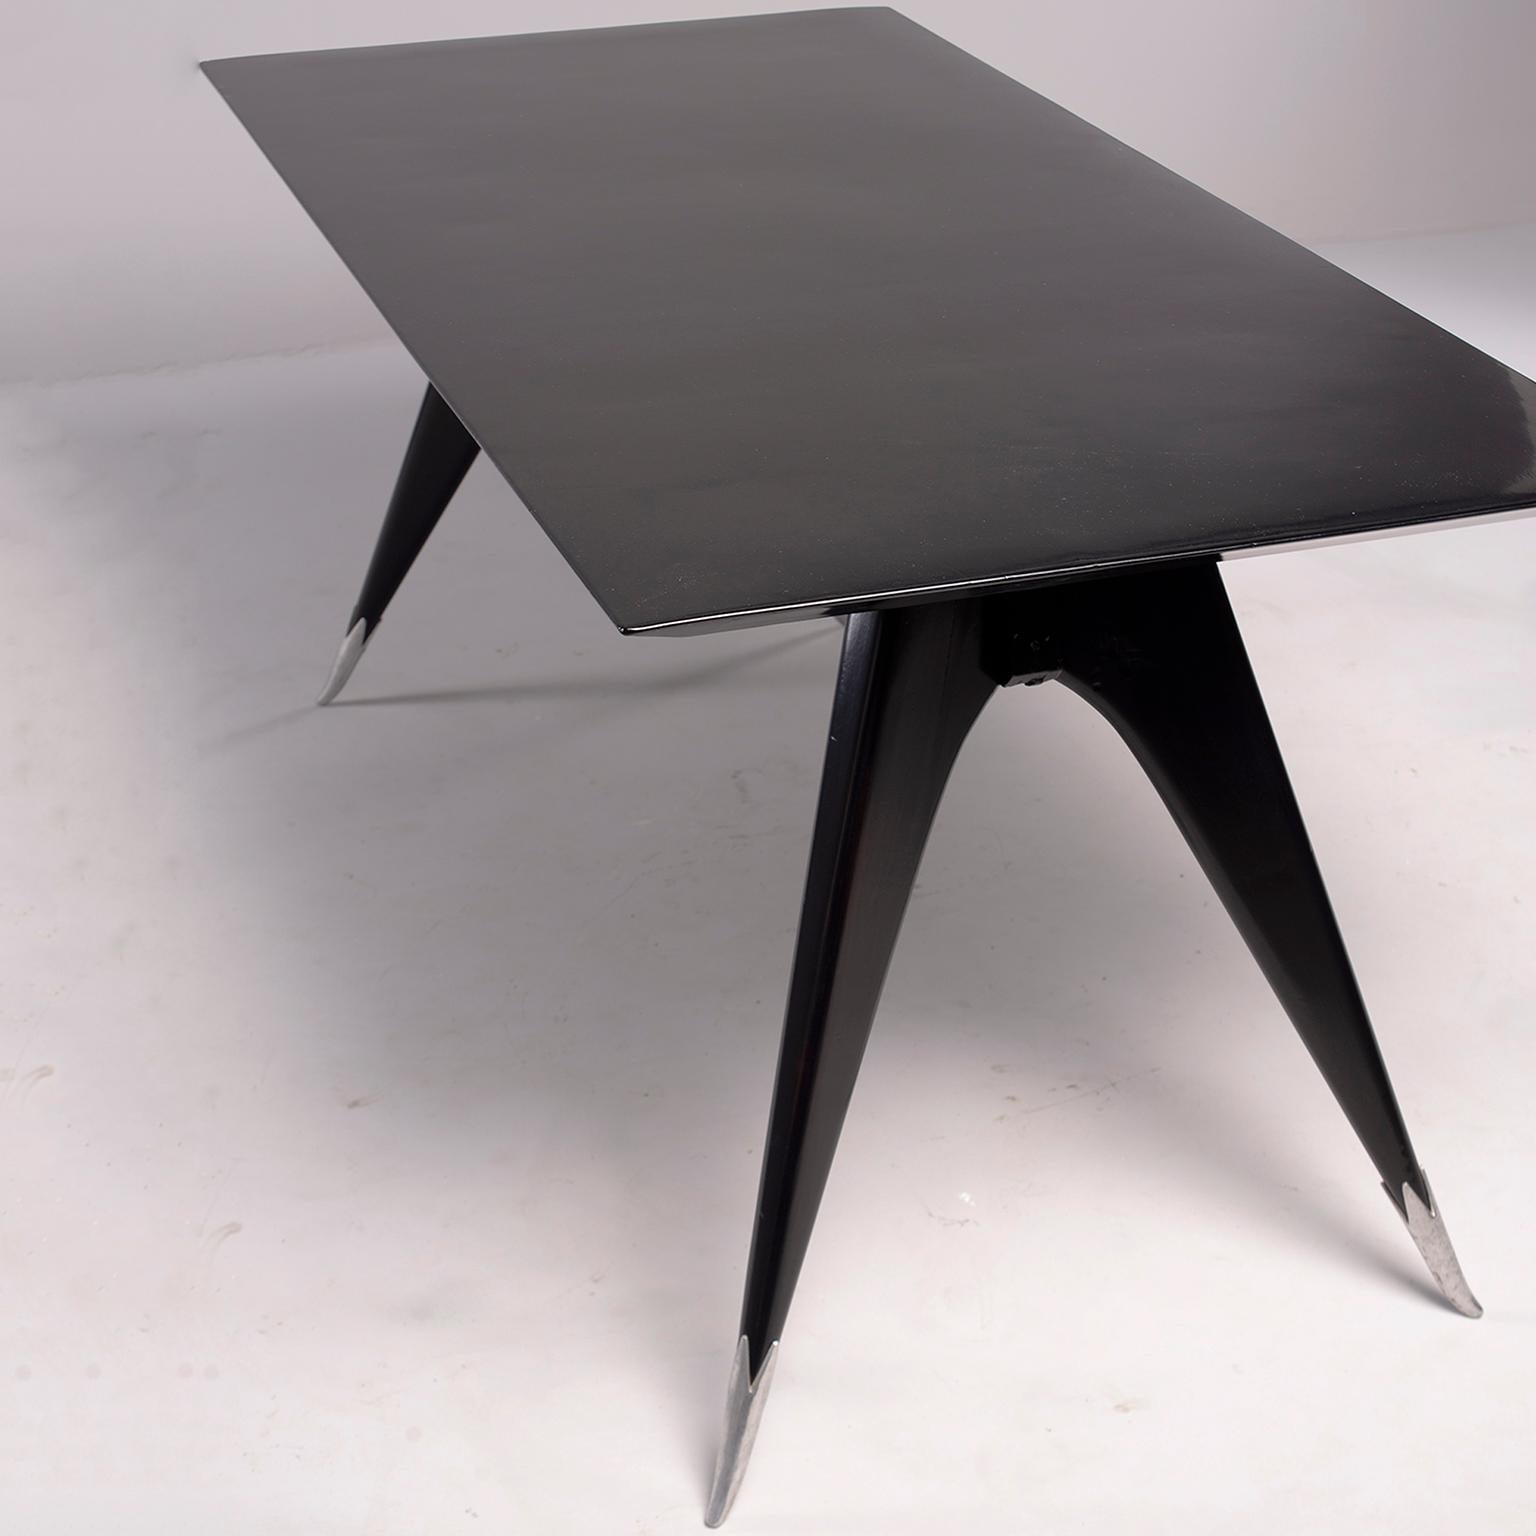 20th Century Midcentury Italian Ebonized Dining Table with Tapered Legs and Silver Leg Caps